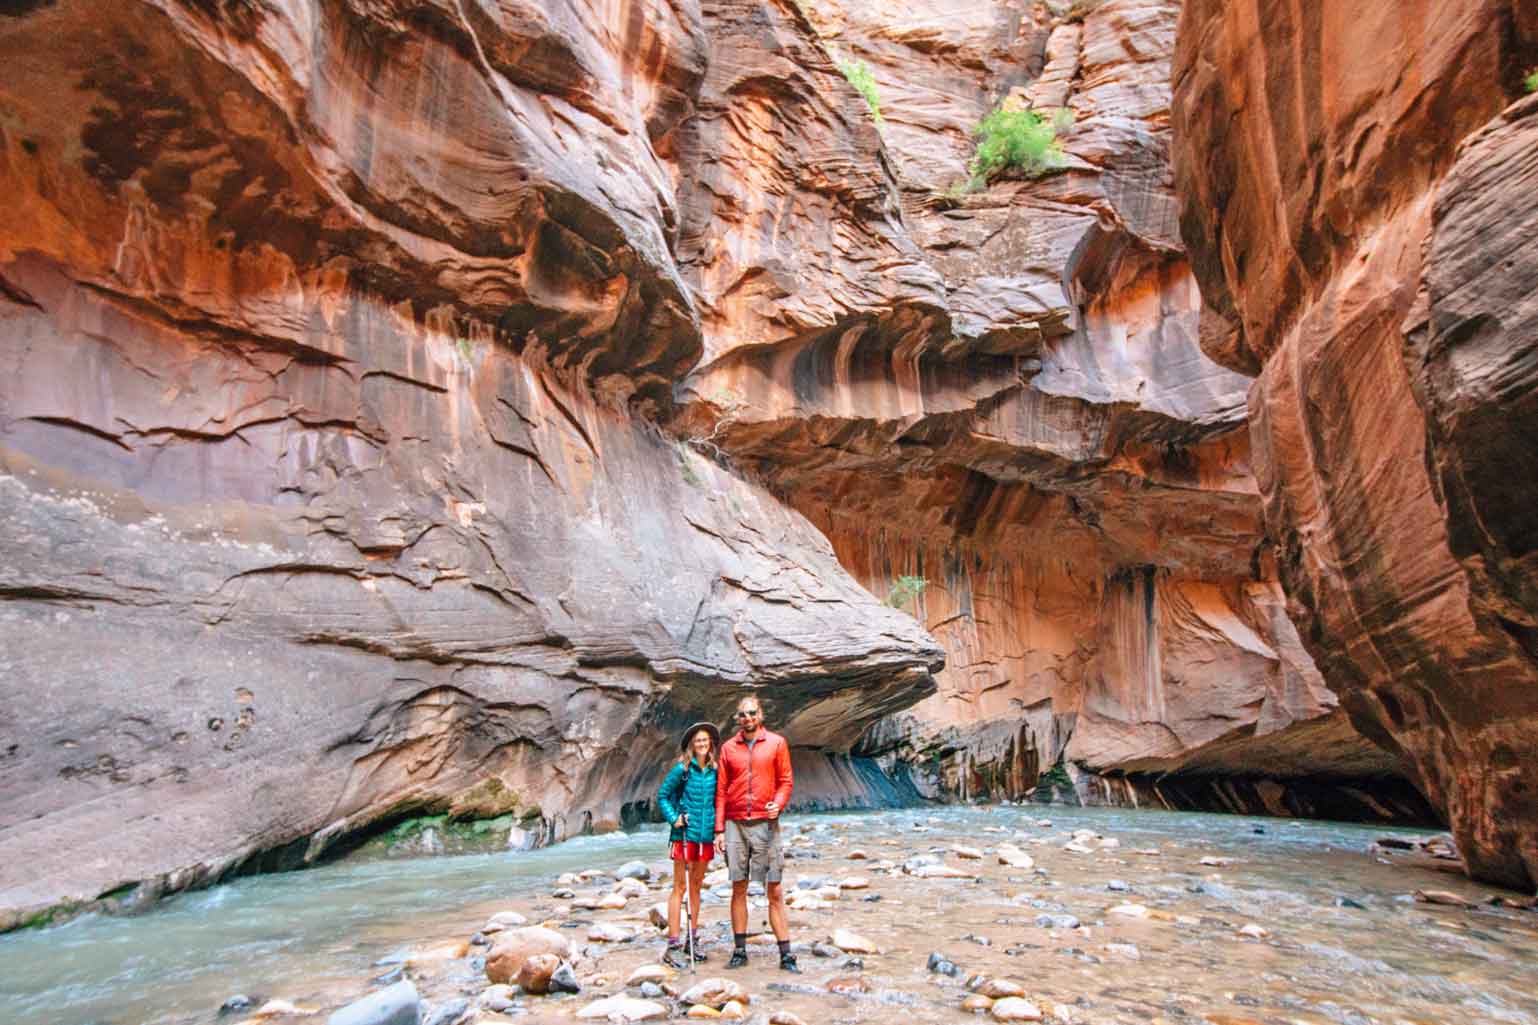 The Complete Guide to Hiking the Narrows in Zion (Gear, Permits